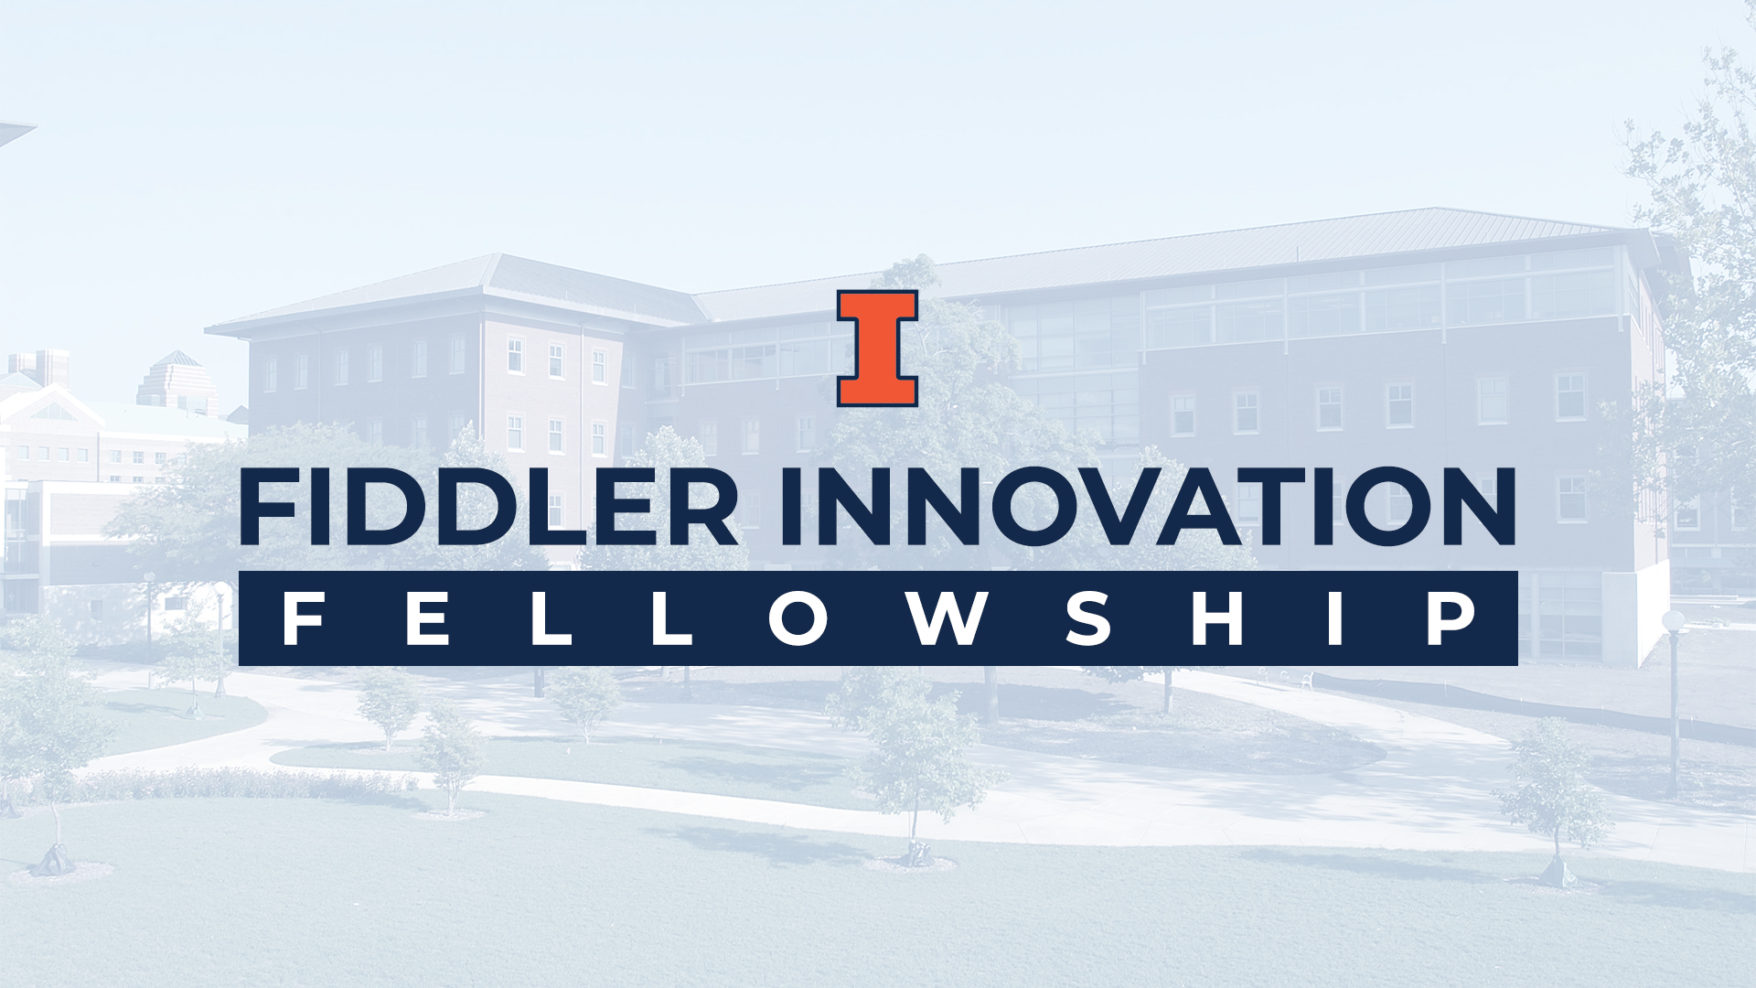 Greyed out image of NCSA building, with the text 'Fiddler Innovation Fellowship' with Illinois Block I logo